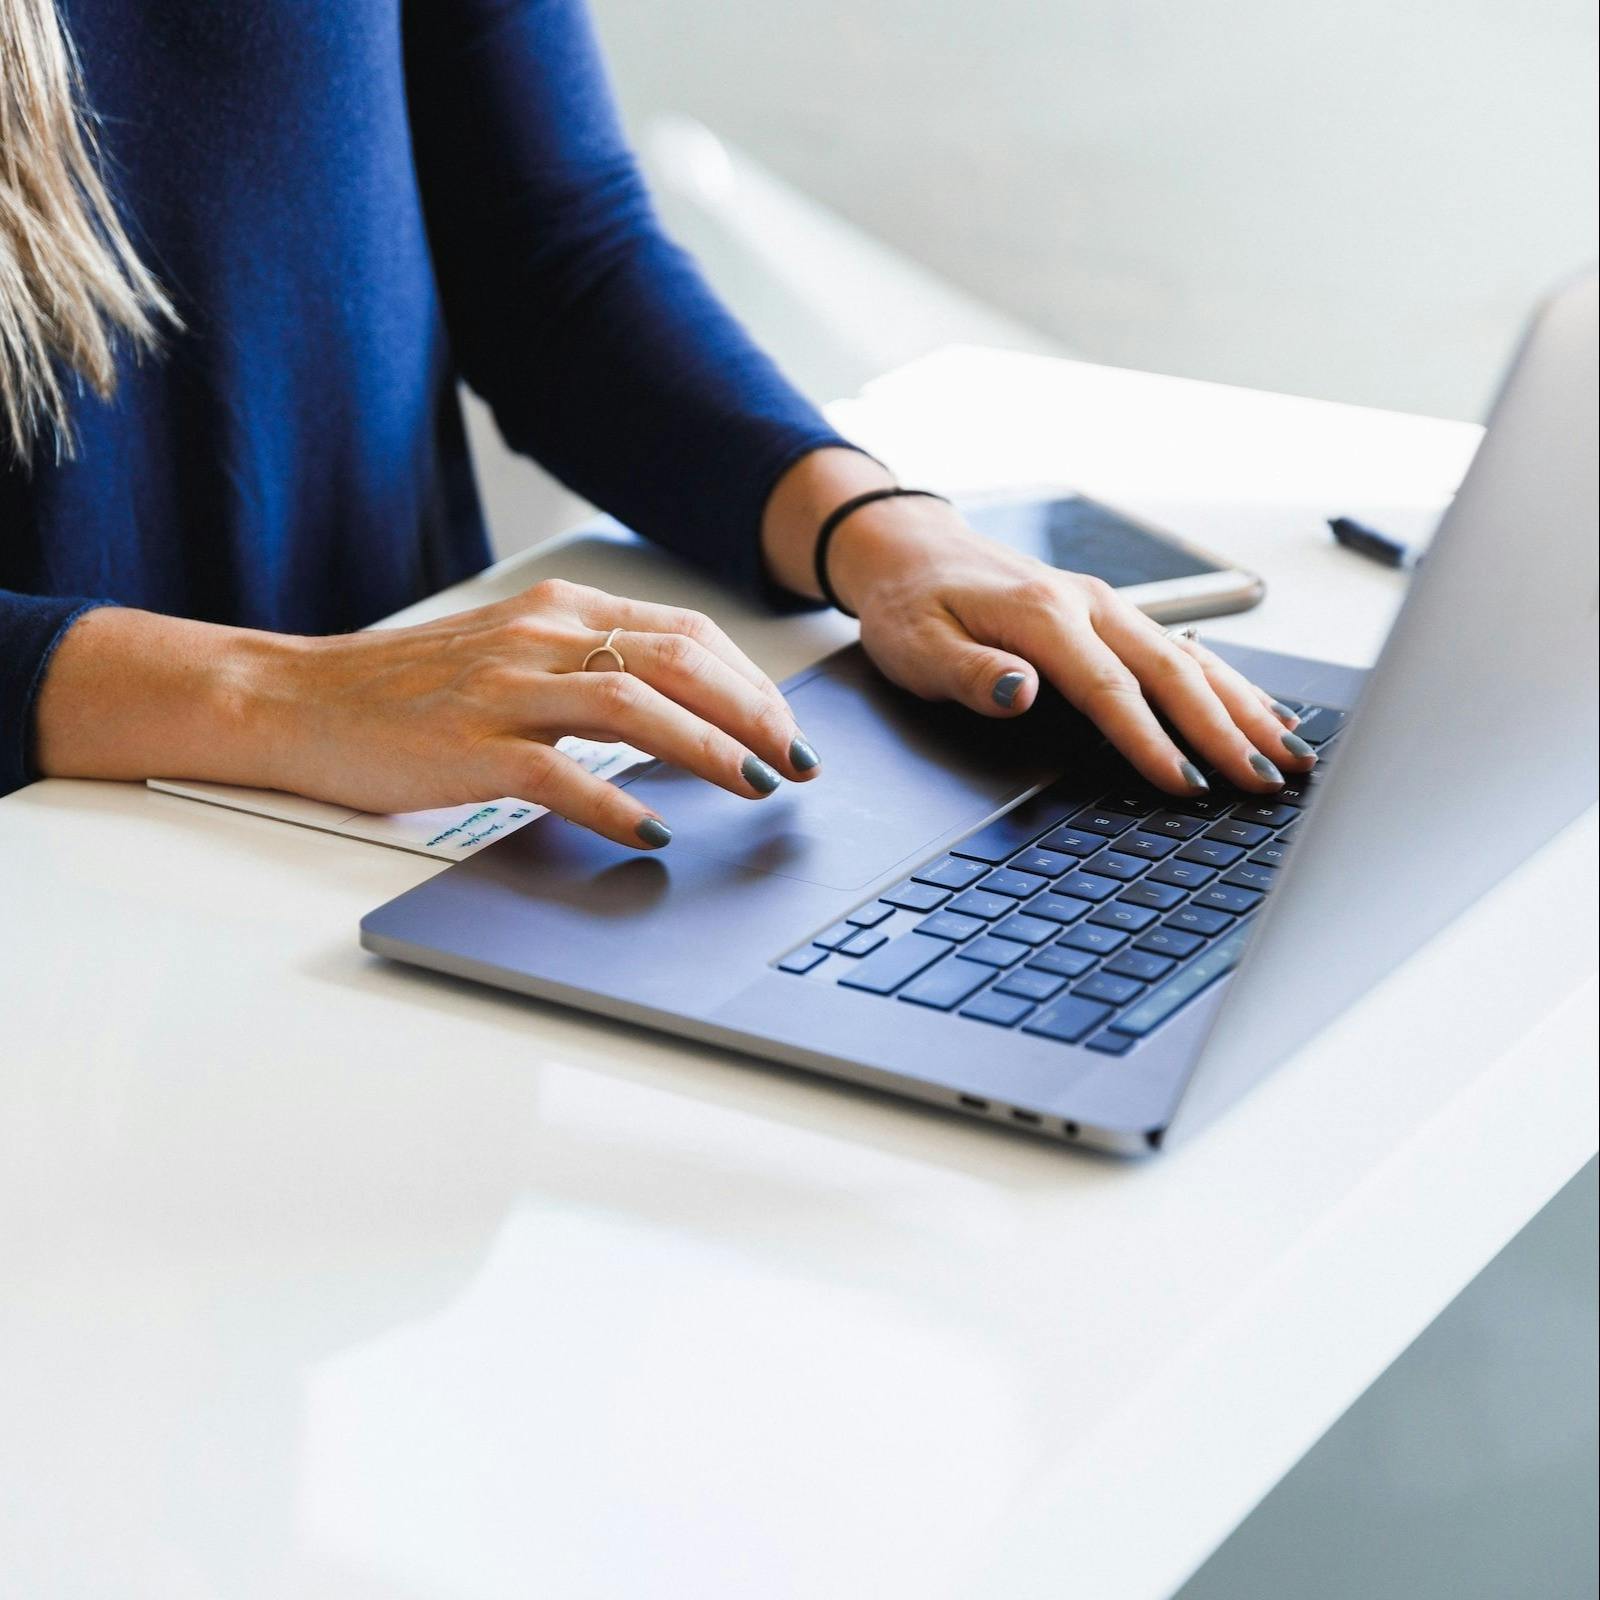 Stock image_Woman typing on computer_Rectang